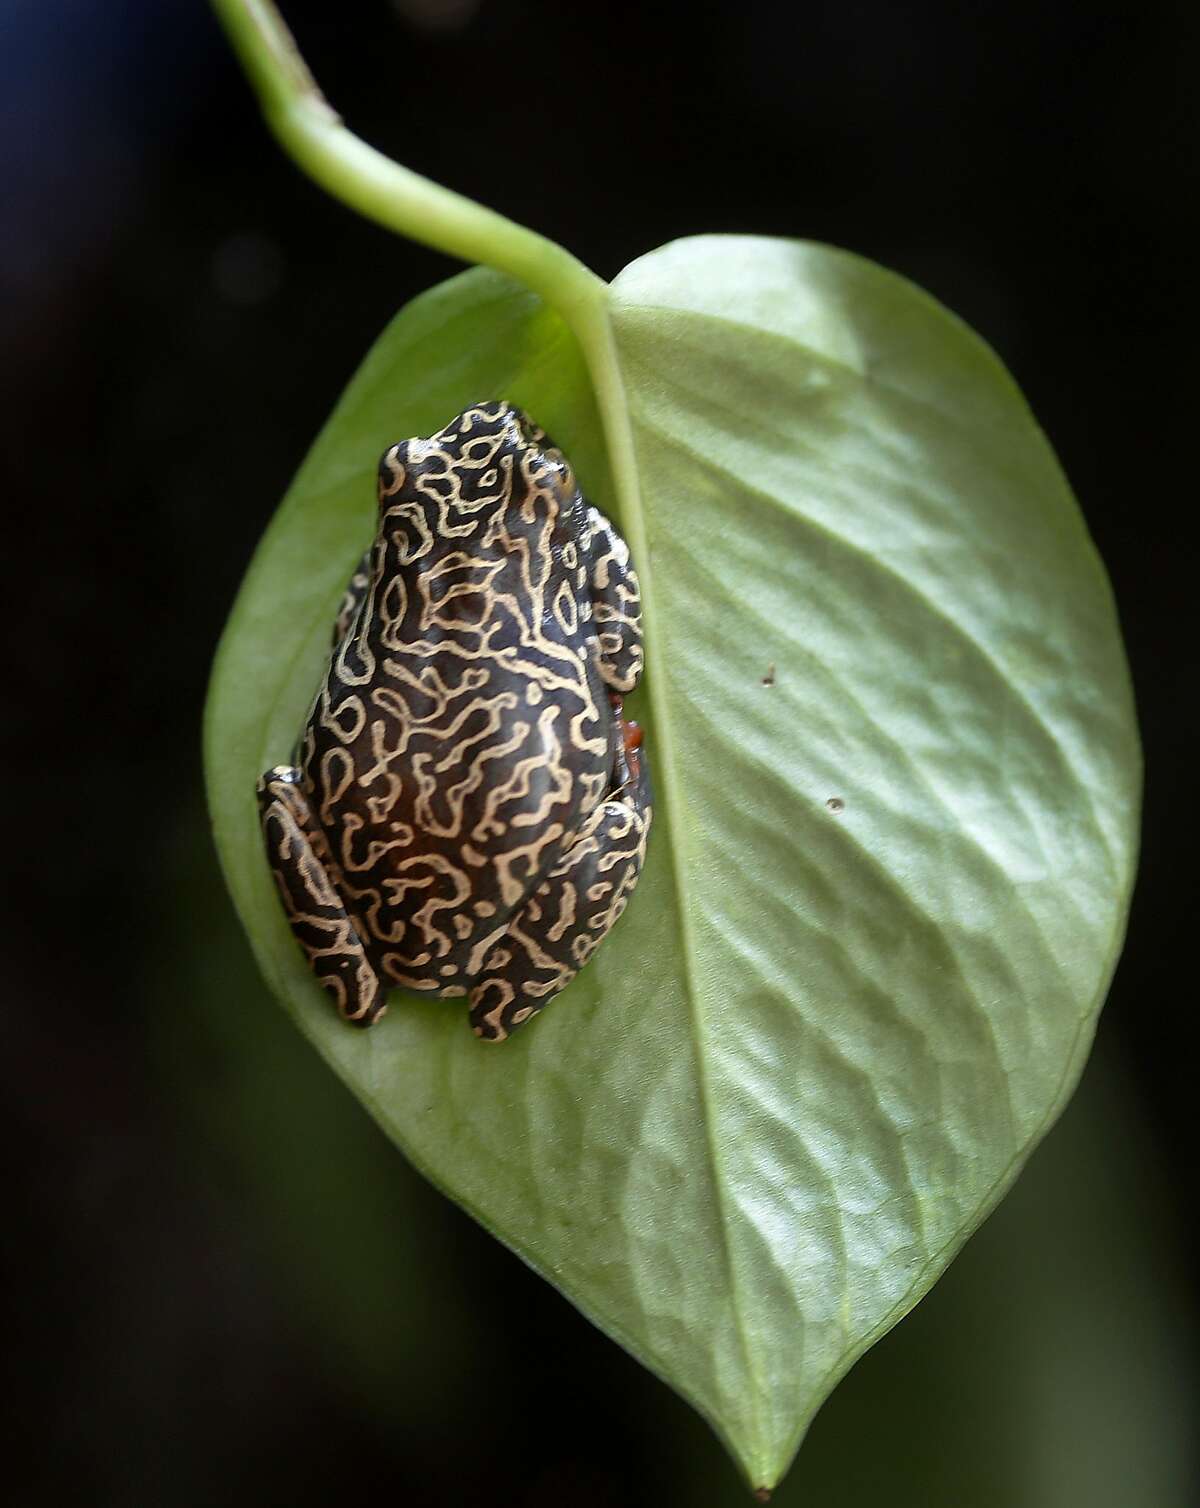 The Riggenbach's reed frog changes color in puberty and their mosaic bodies are part of the new exhibit Tuesday June 9, 2015. The California Academy of Sciences in San Francisco, Calif. is opening a new exhibition of animals that change color in the course of their lives to disguise themselves or just blend into their environment.